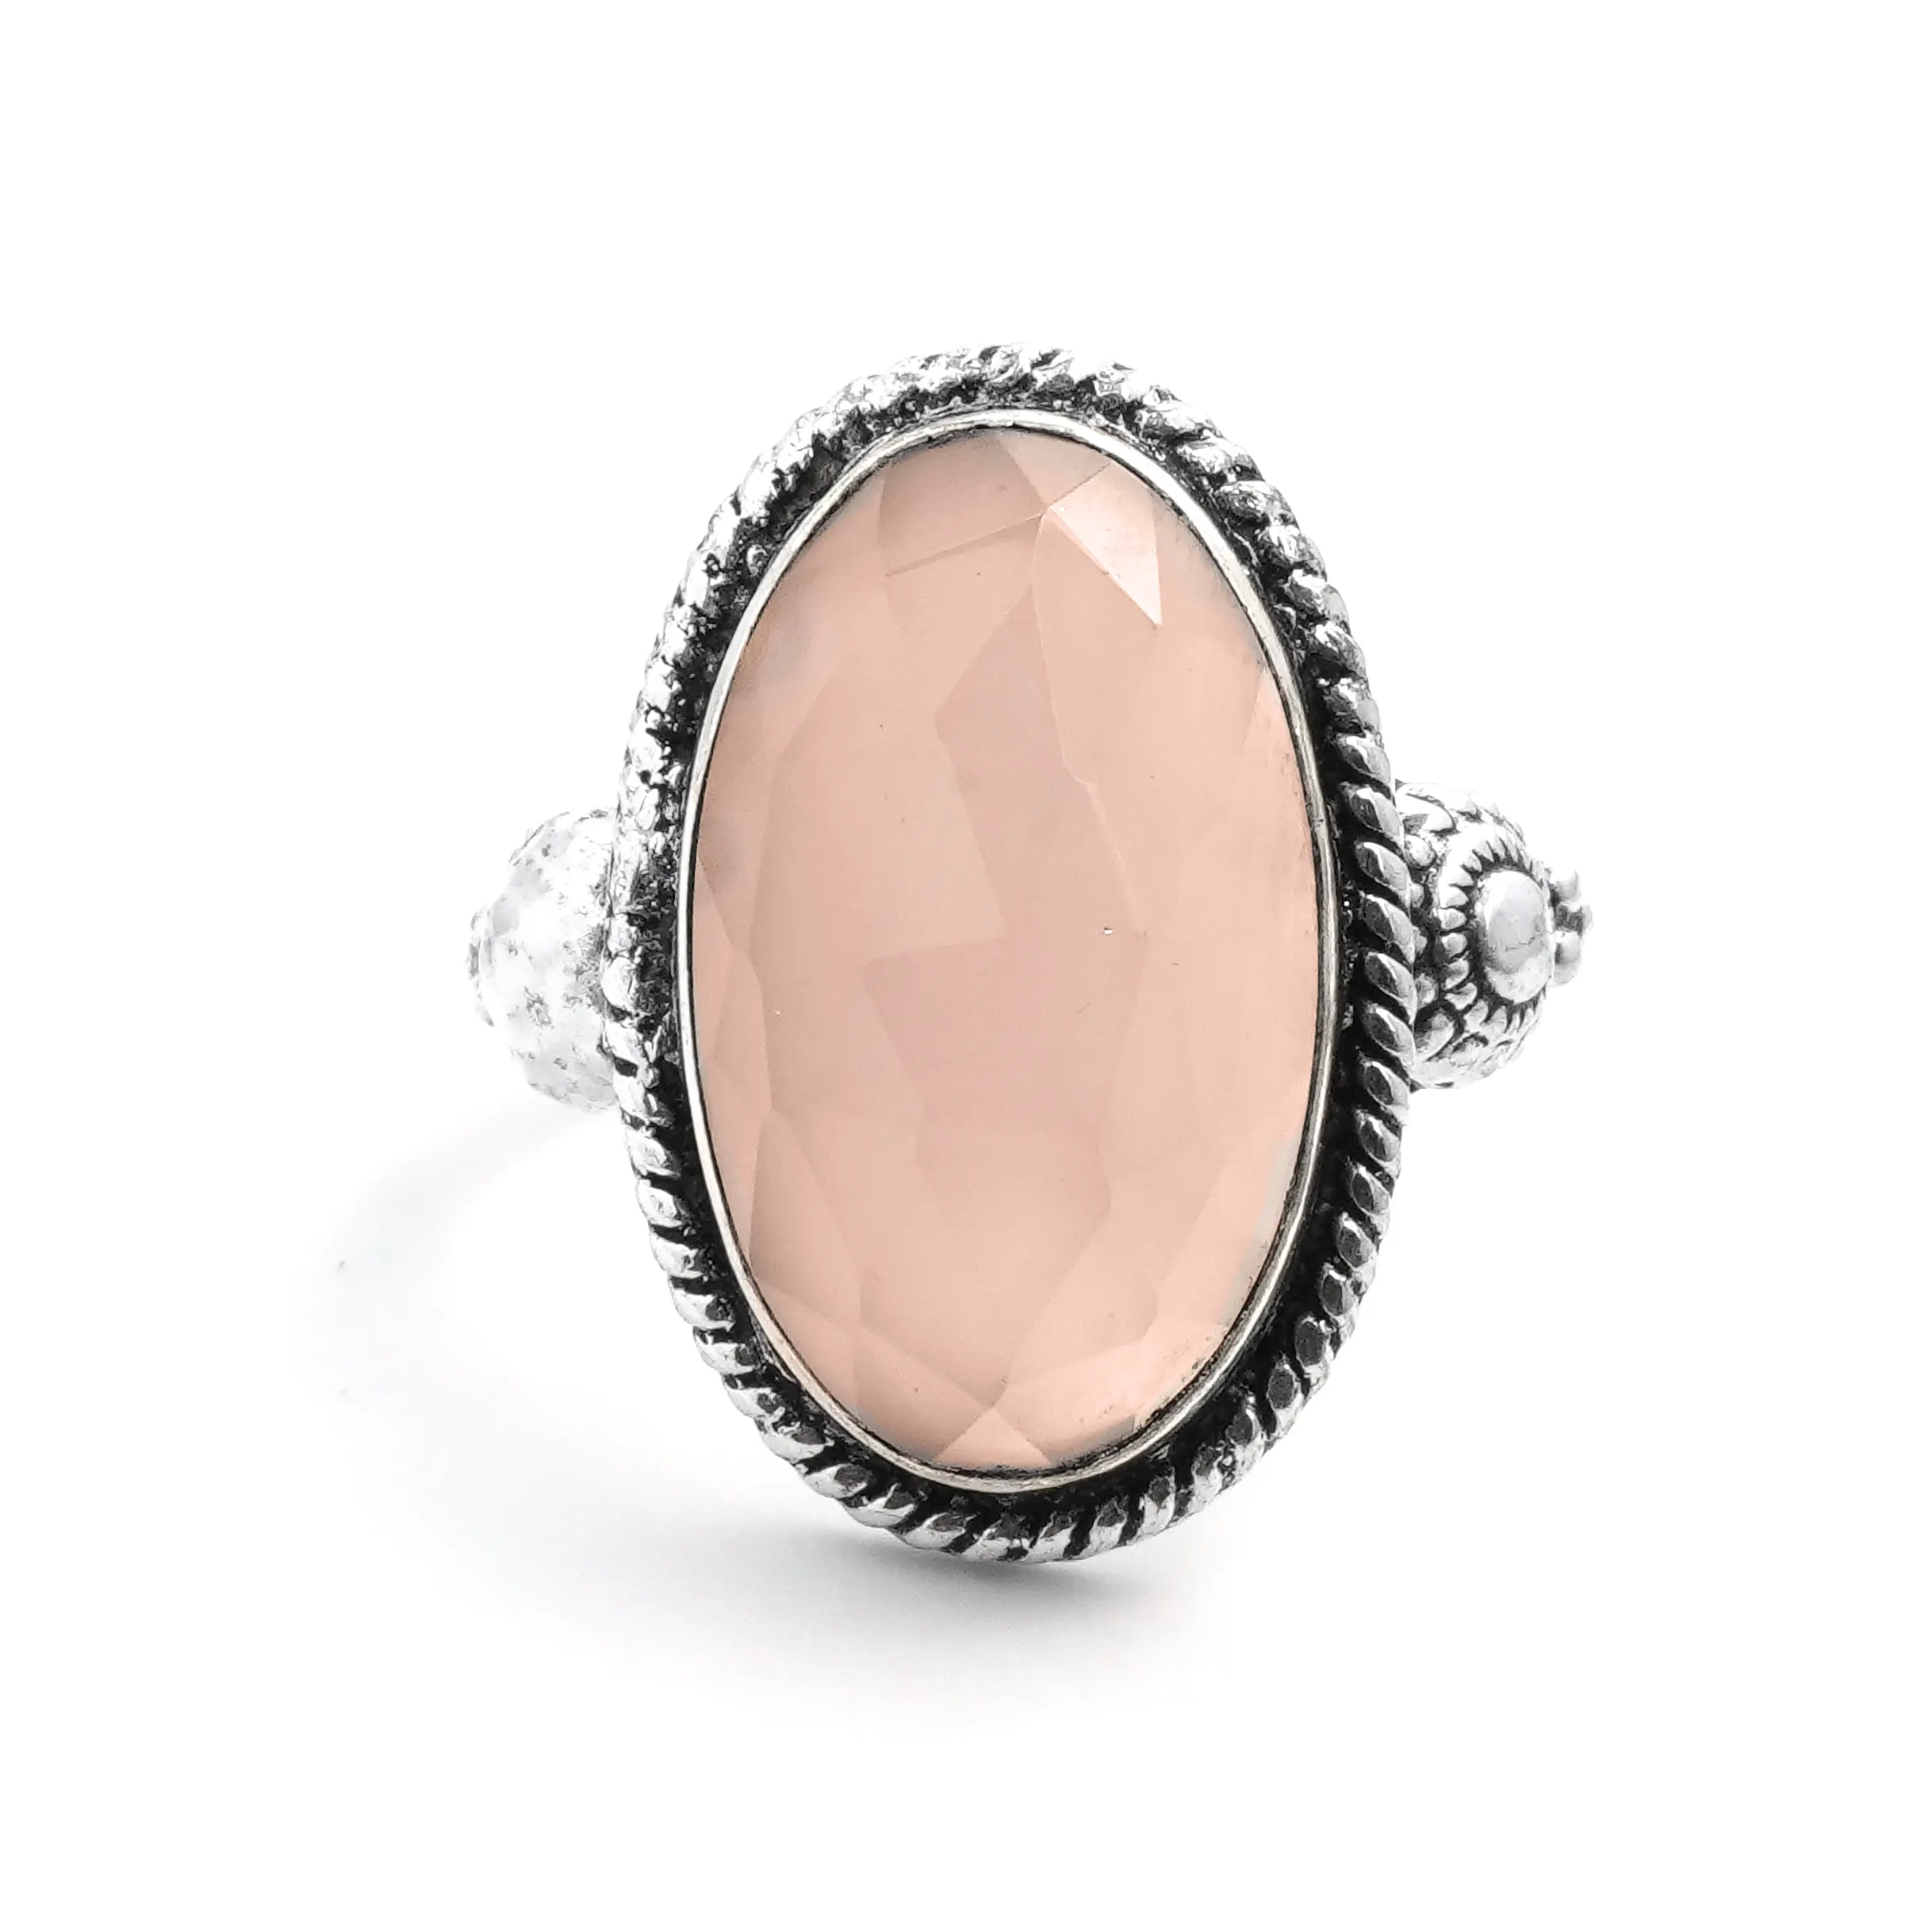 Solid 925 Sterling Silver Natural Rose Quartz Stone Jewelry Oval Unique Wedding Party Gift Made In India Women Gemstone Ring